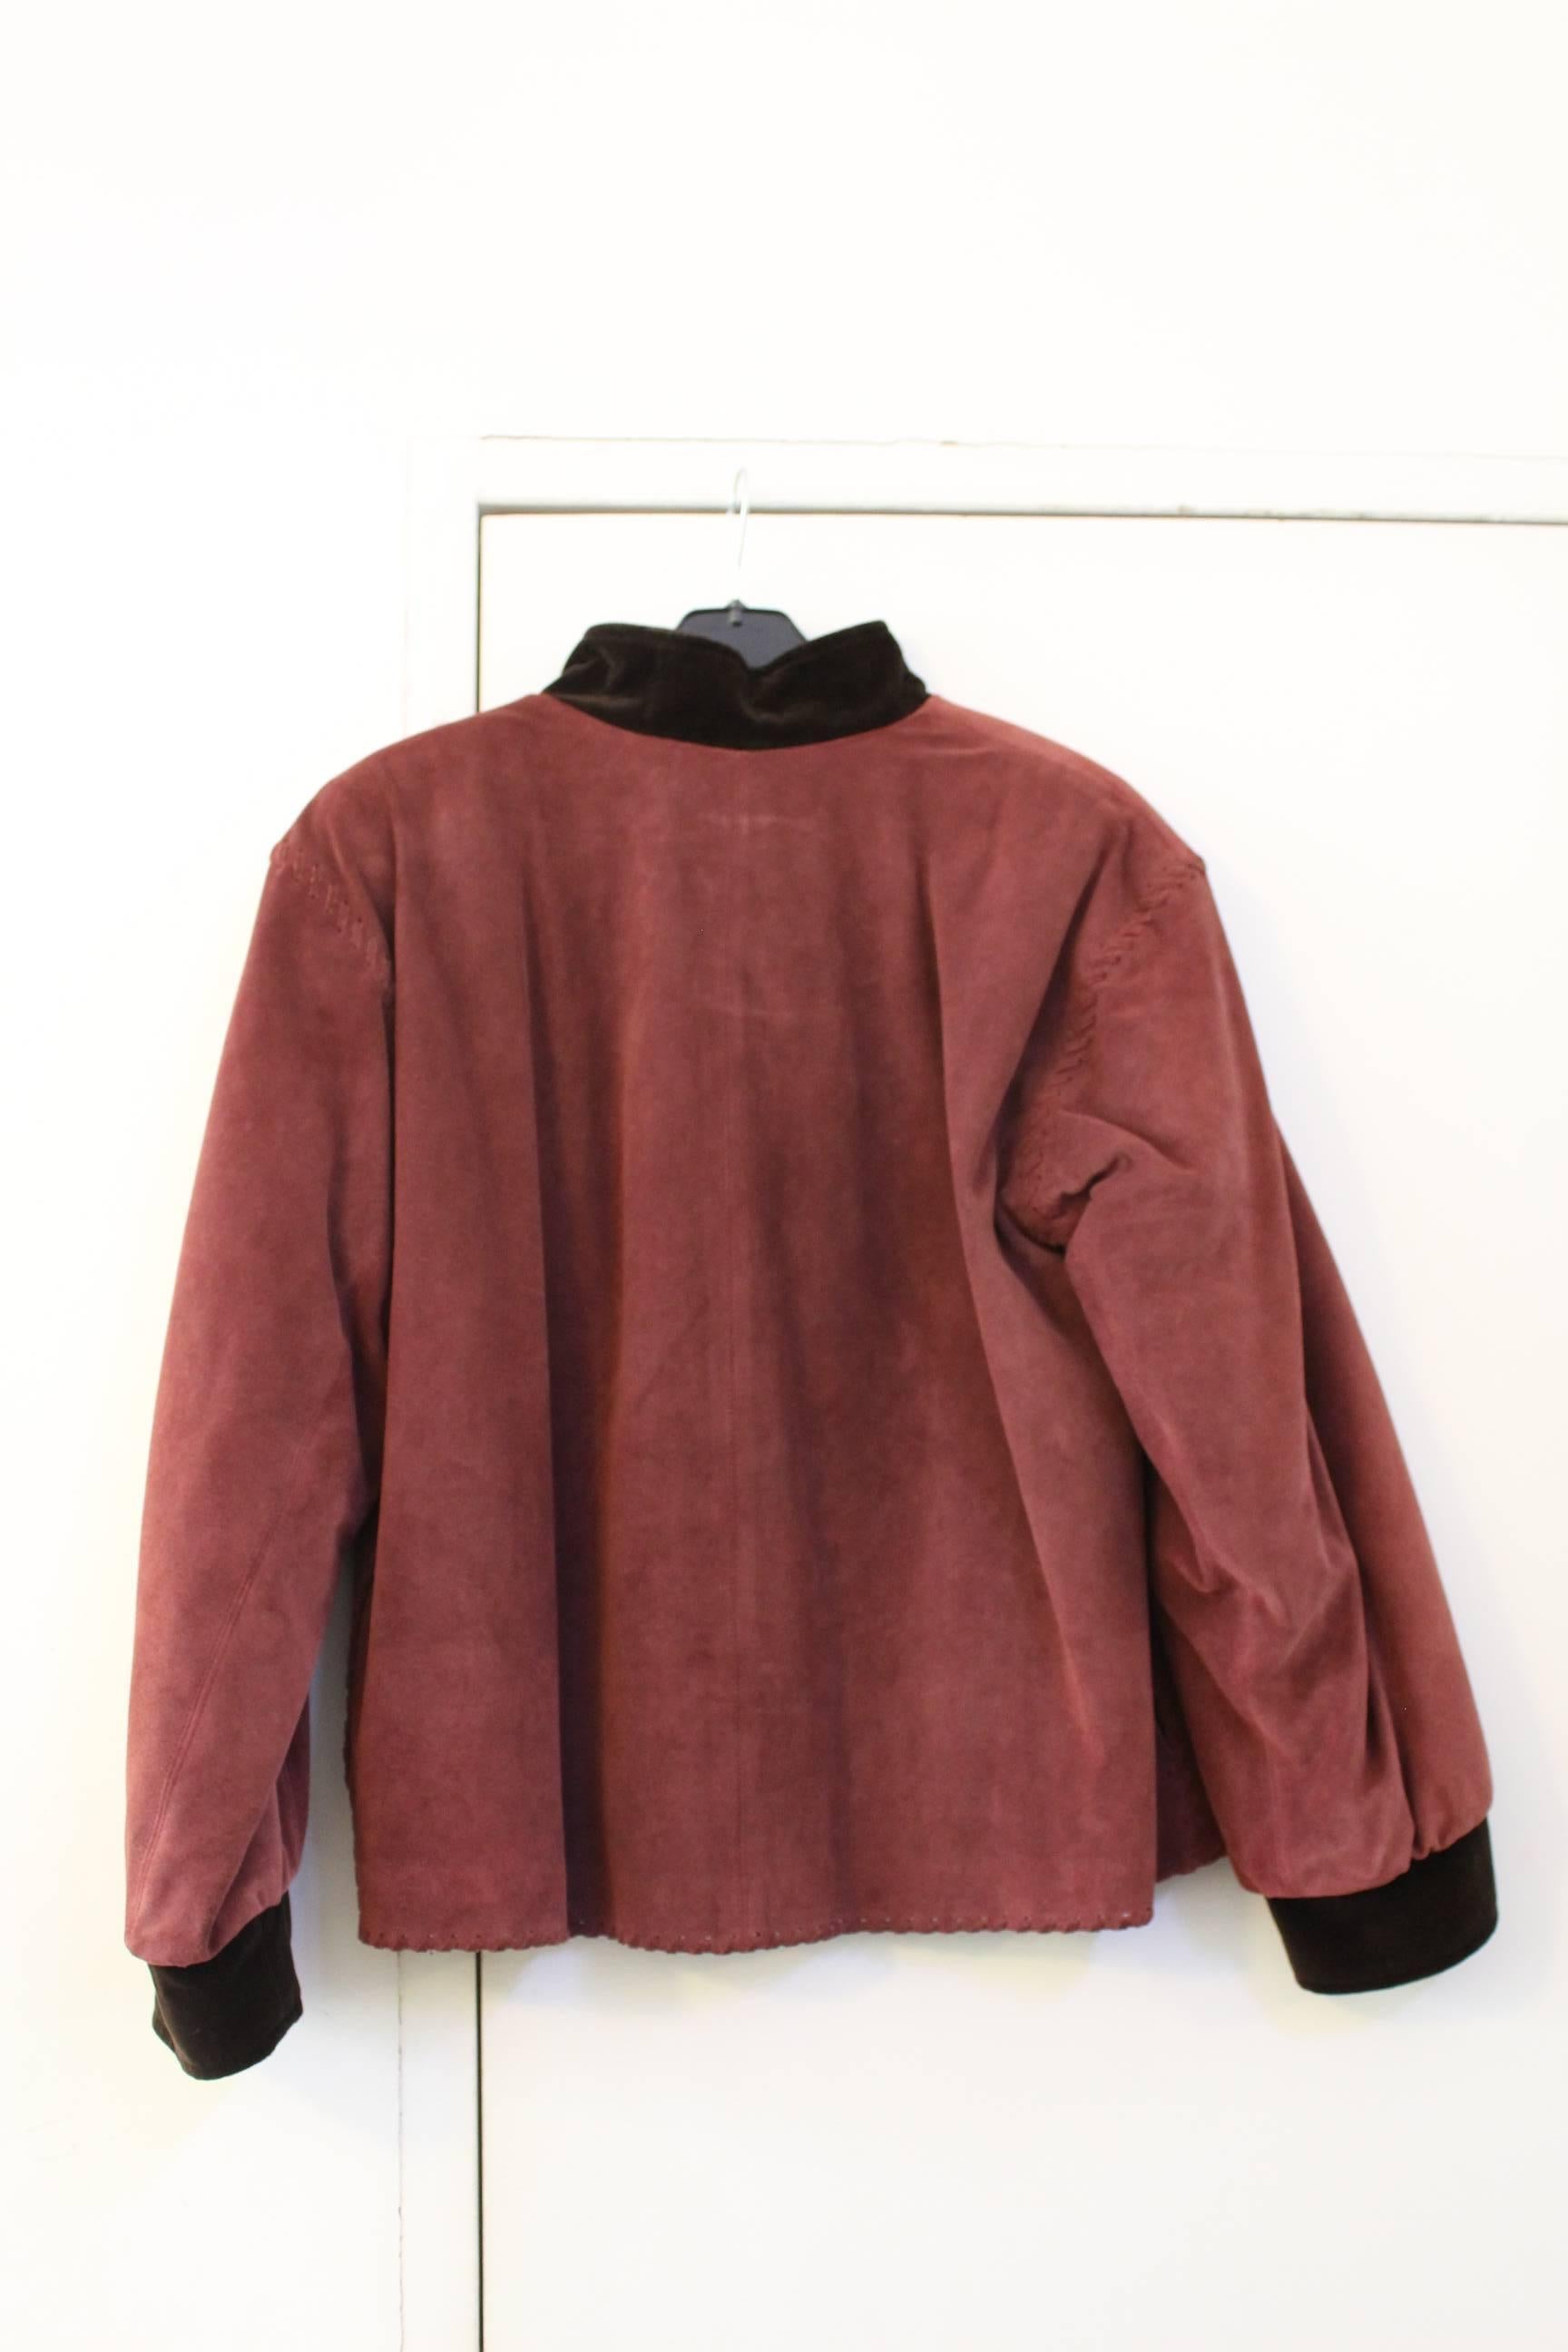 Really nice jacket from yves saint Laurent from russian inspiration in leather.
Really good condition.
Size 36 (small to xs)
Really warm it iss doubled inside